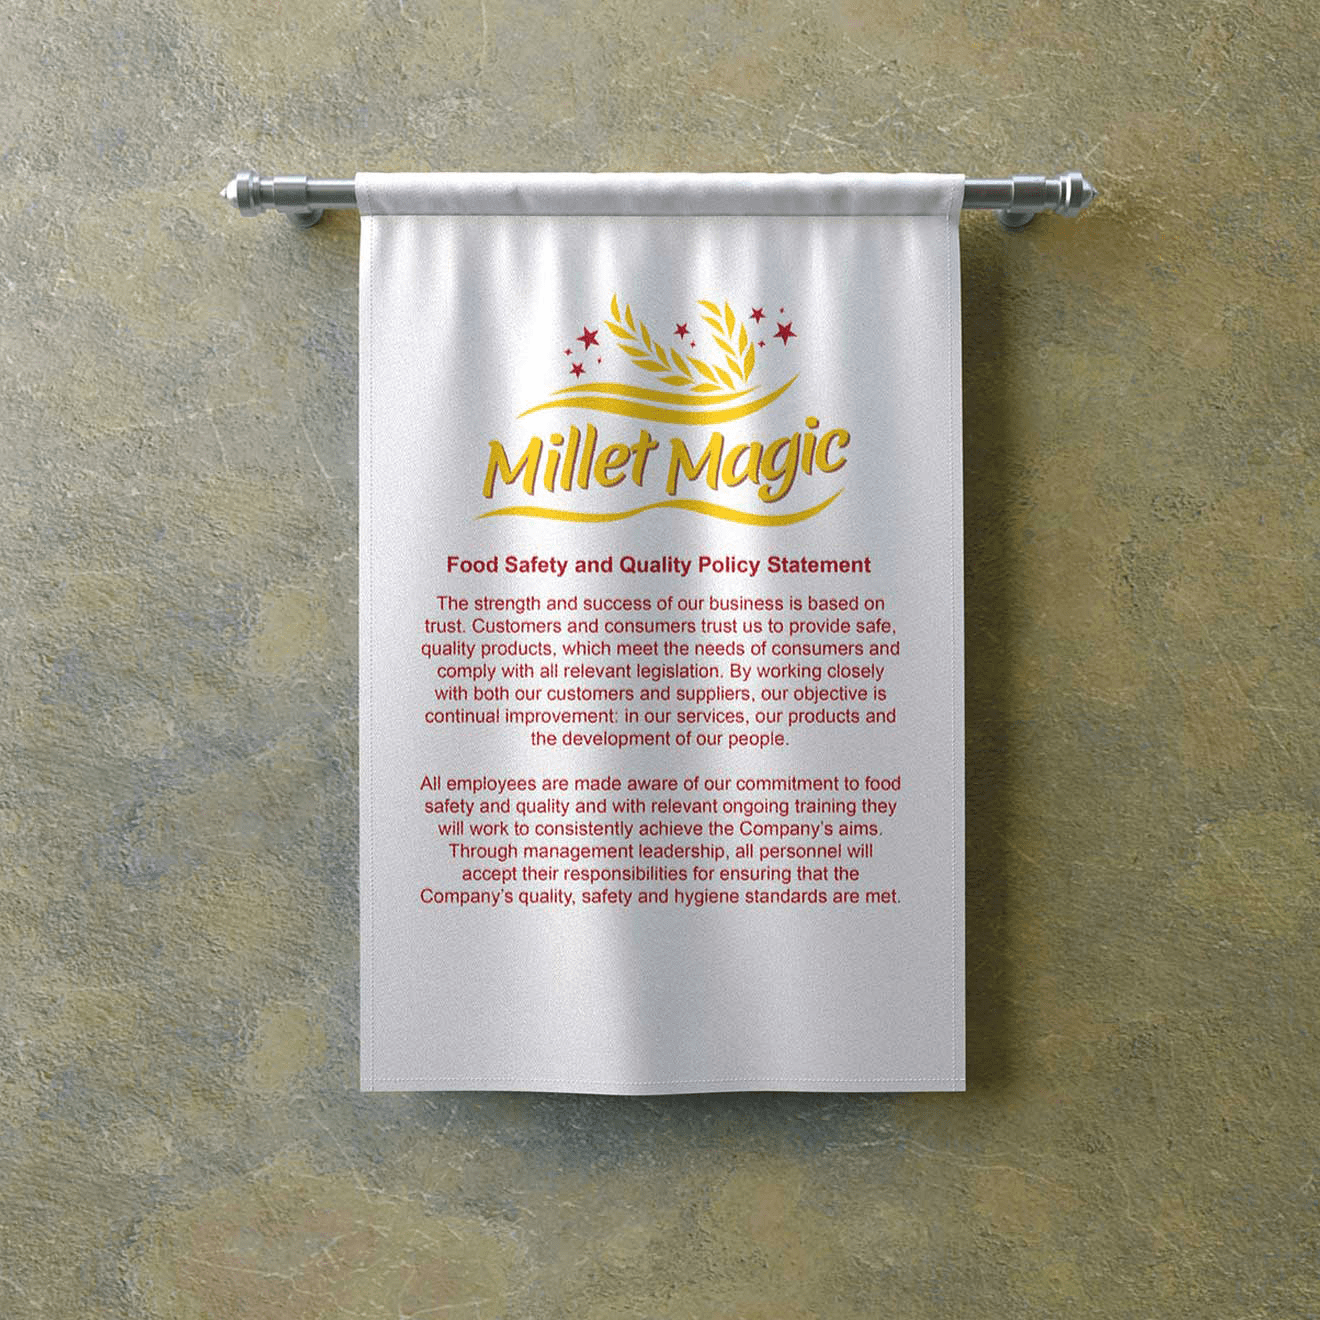 Millet Magic Food Safety and Quality Policy Graphic Design, Branding Packaging Design in Erode by Creative Prints thecreativeprints